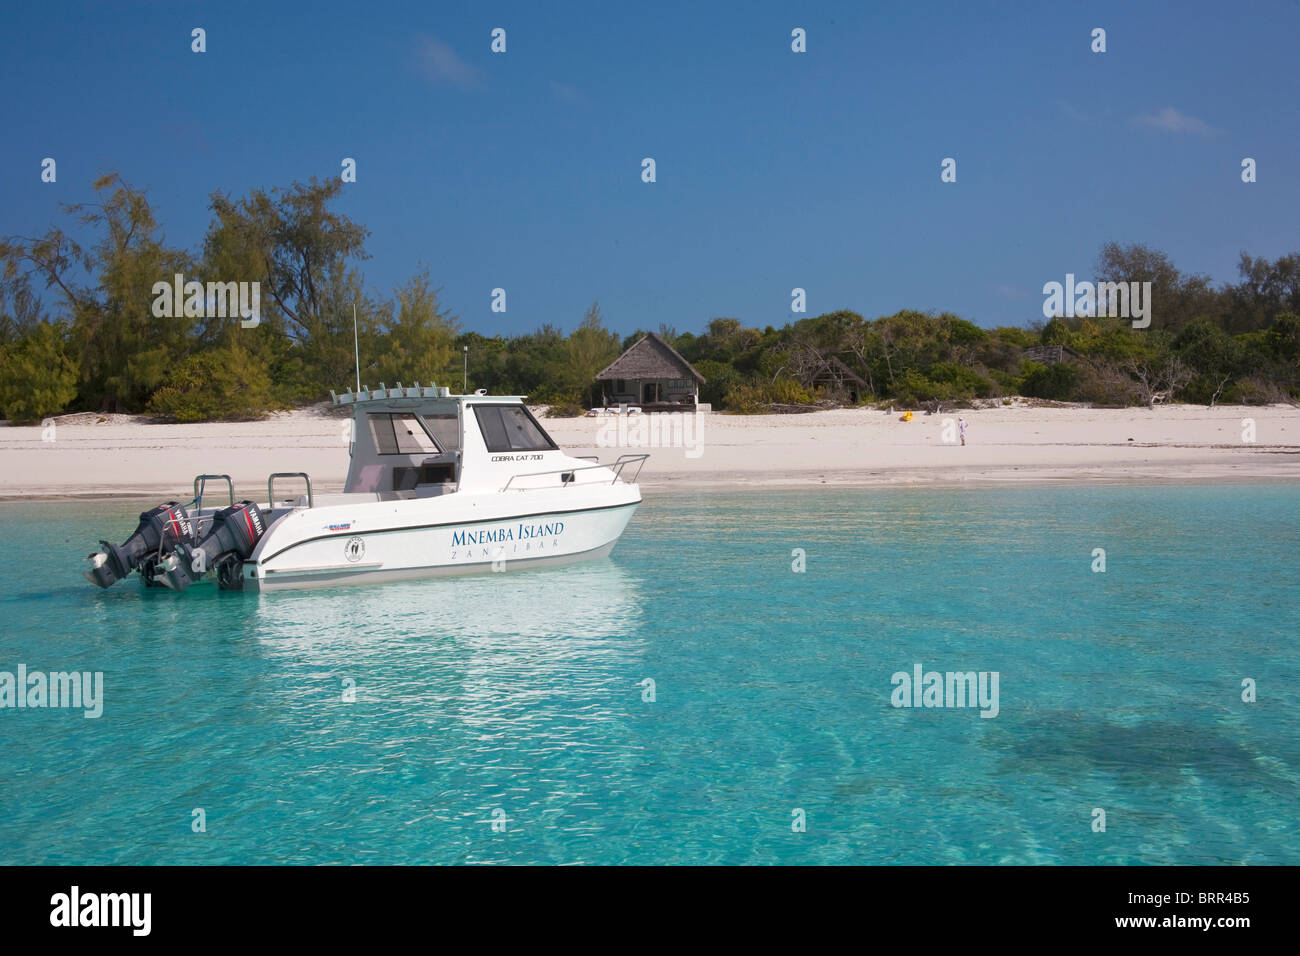 Mnemba Islands motorboat moored in shallow water off the island Stock Photo